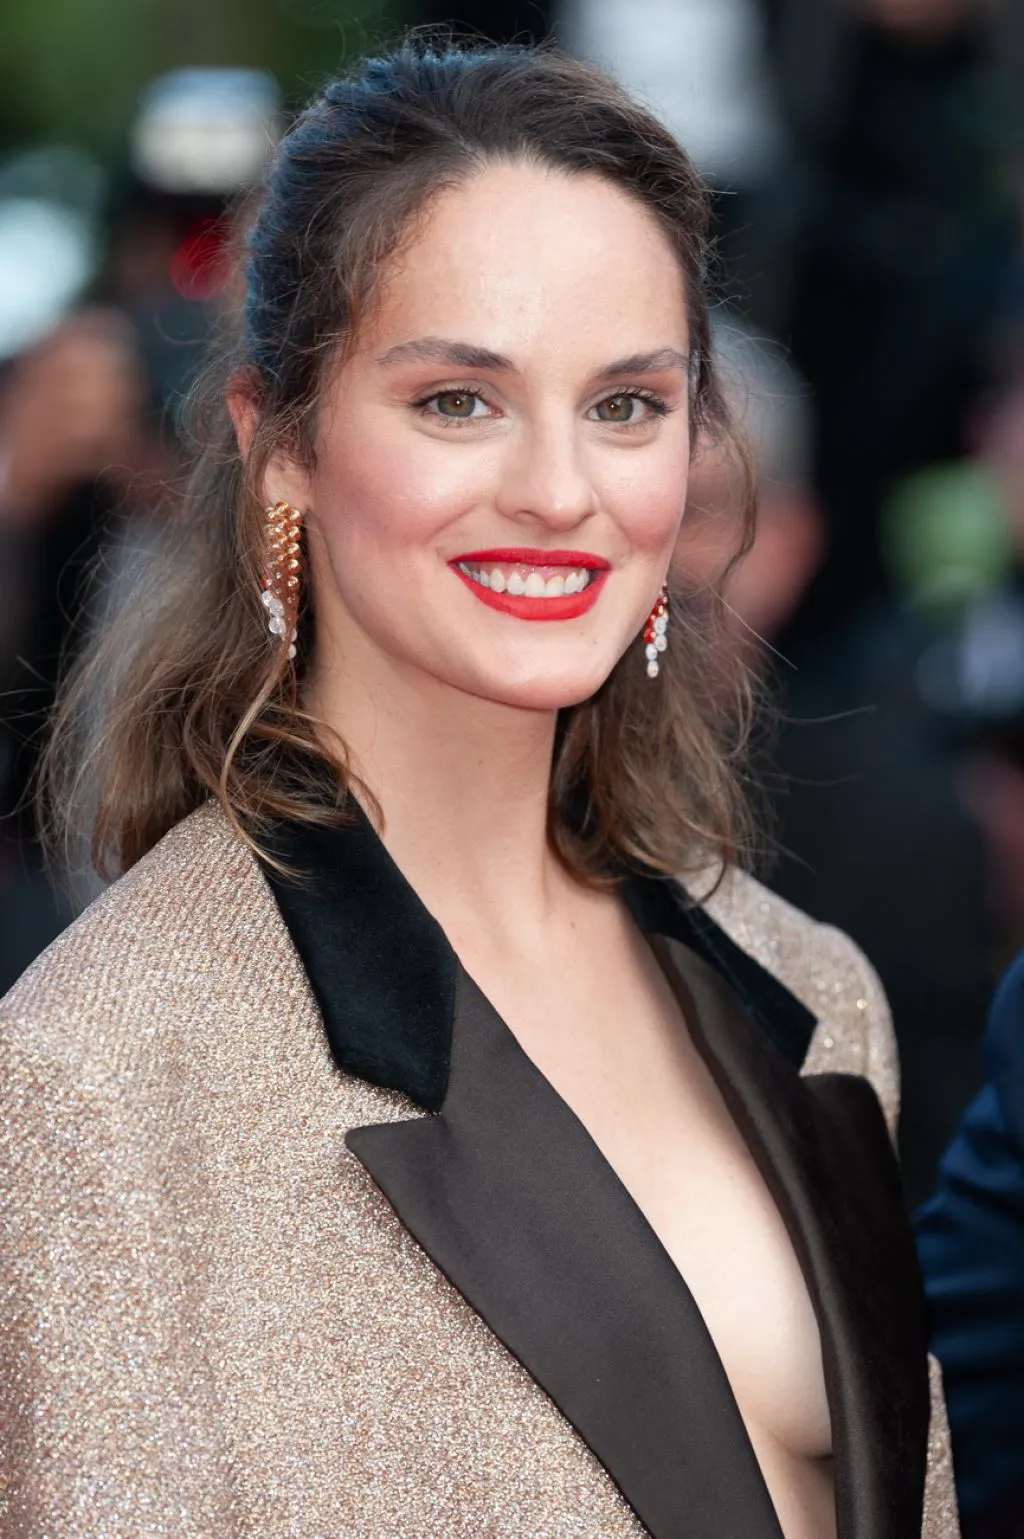 NOEMIE MERLANT AT 2021 CANNES FILM FESTIVAL OPENING CEREMONY RED CARPET